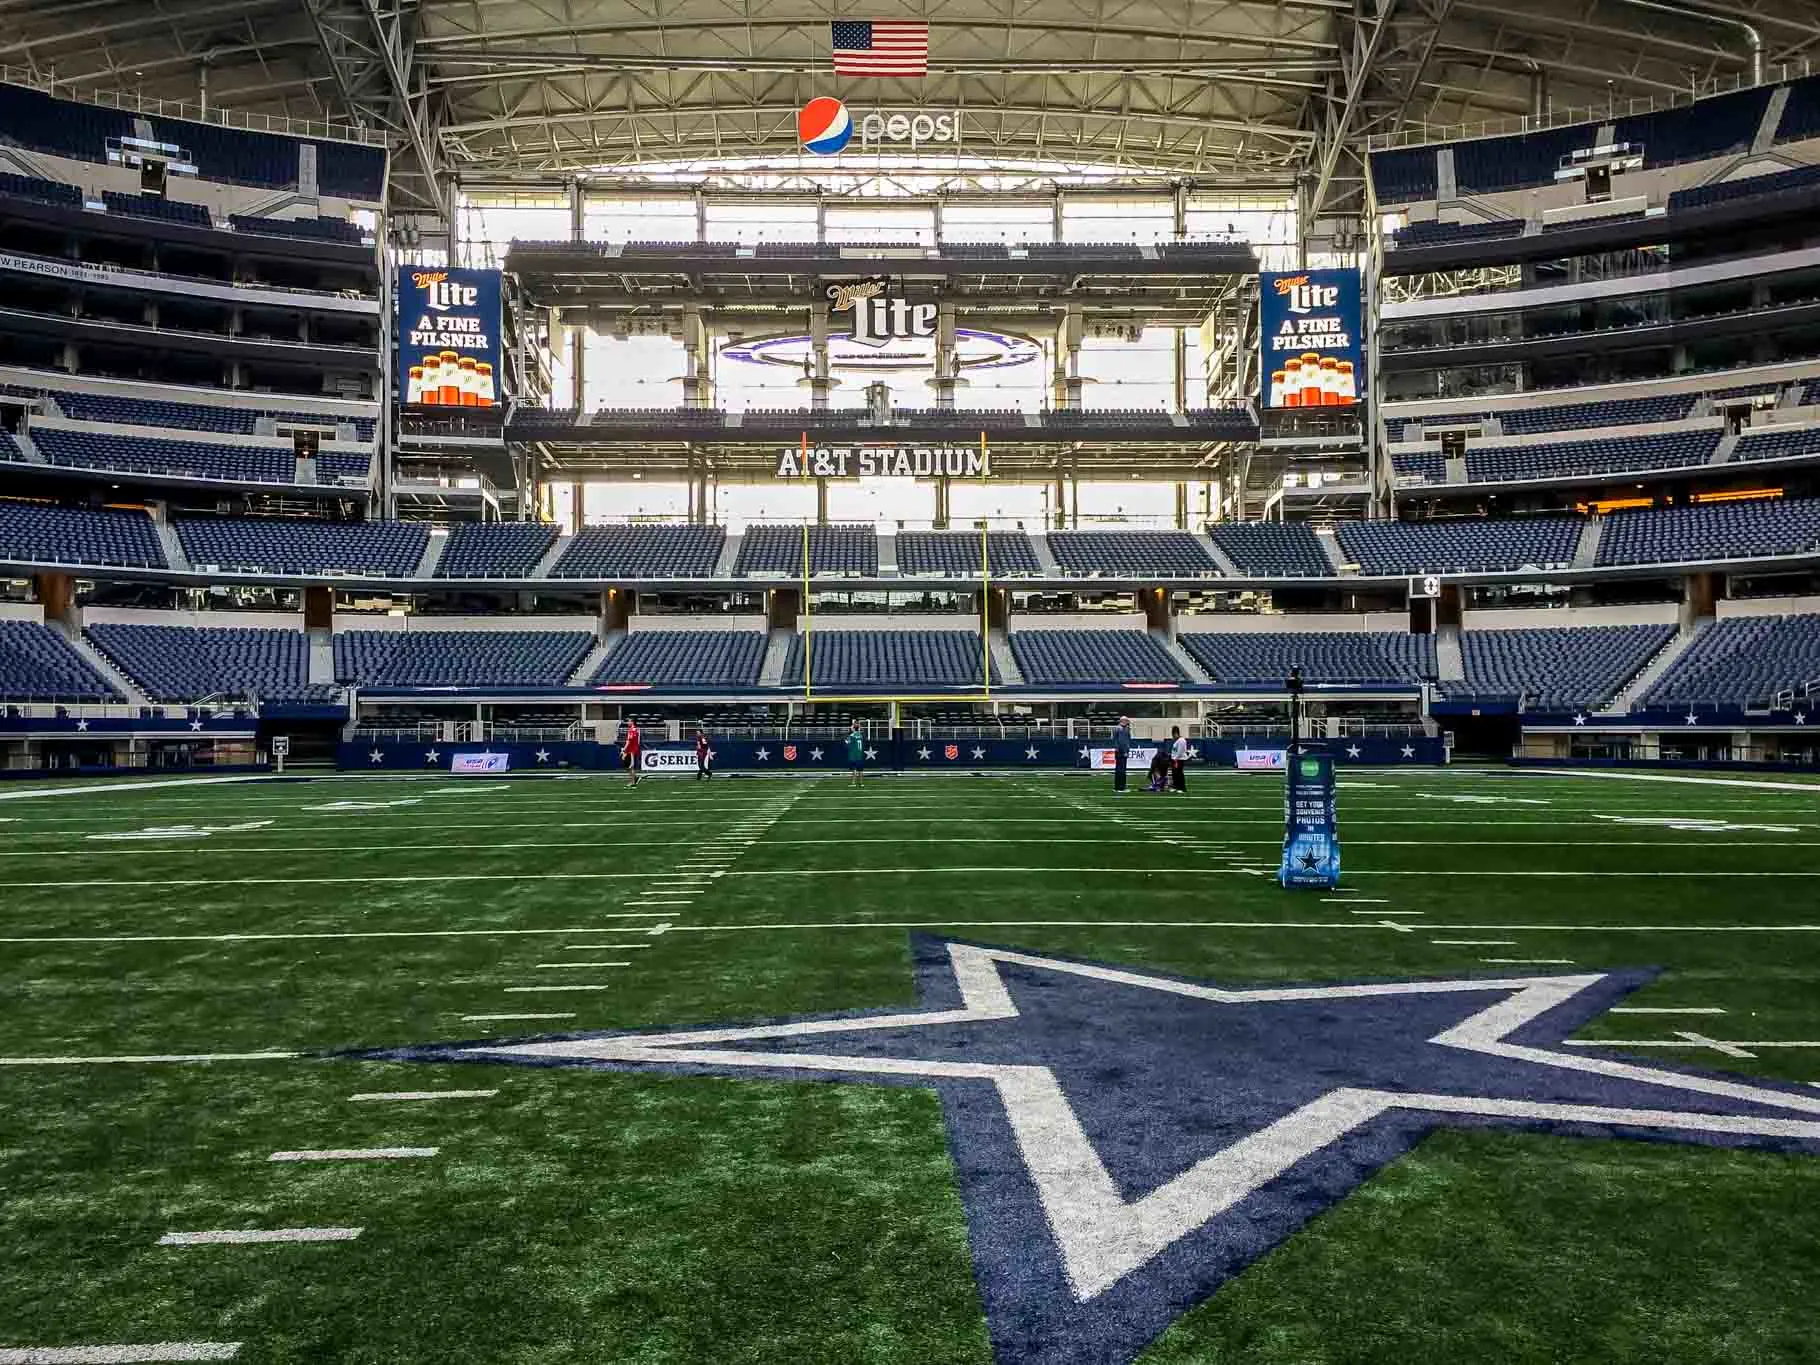 View from the field of a large football stadium with a blue and silver star